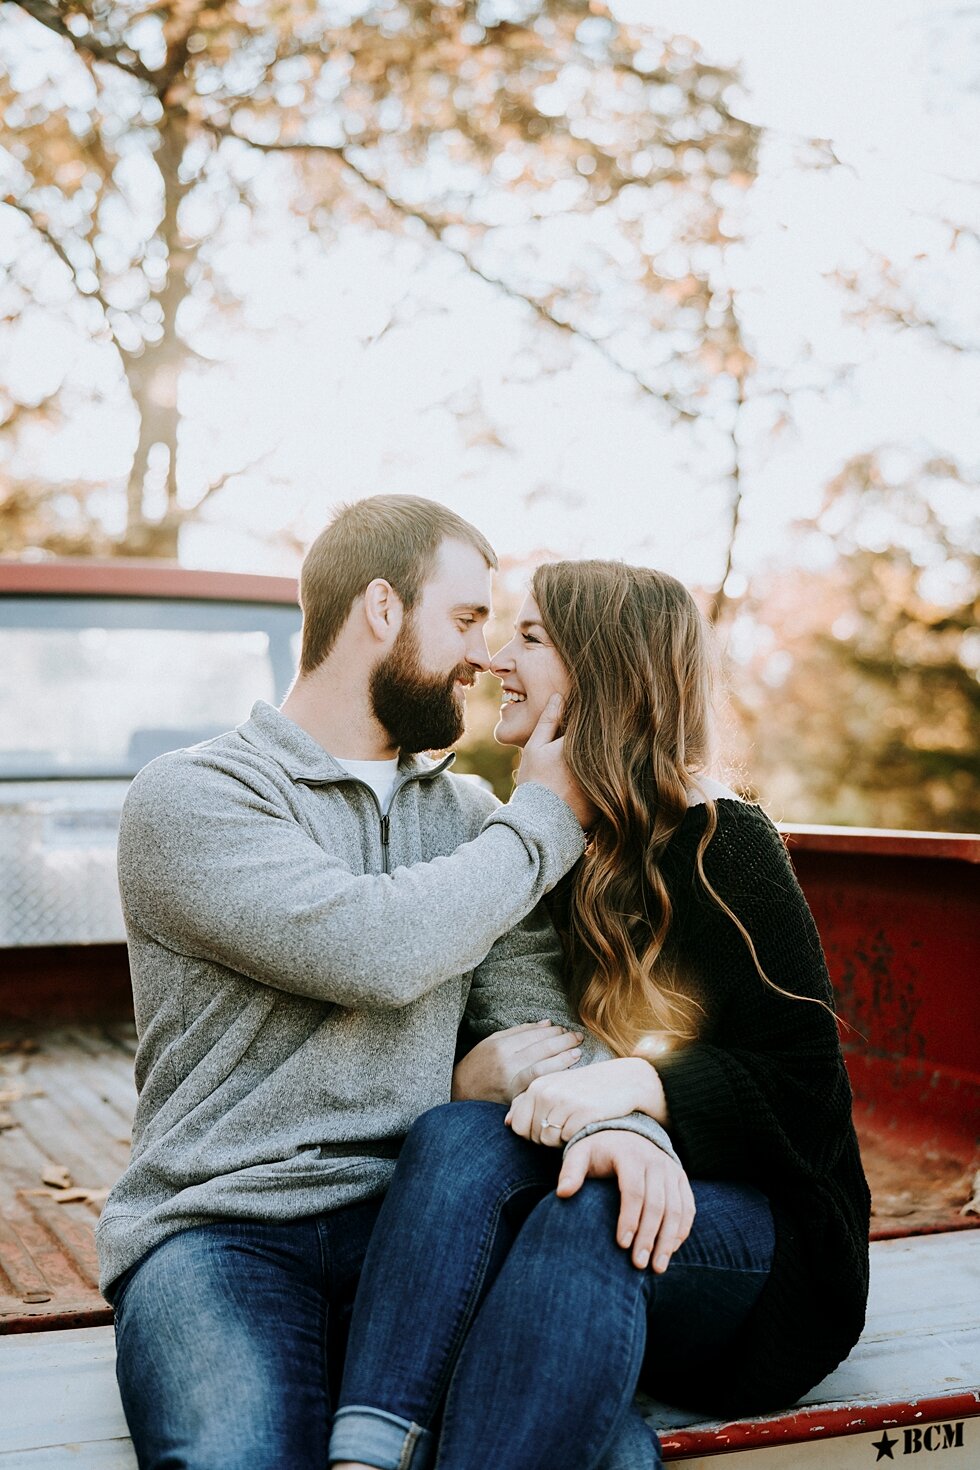  Bride and groom to be share a kiss on the back of this red truck! #engagementgoals #engagementphotographer #engaged #outdoorengagement #kentuckyphotographer #indianaphotographer #louisvillephotographer #engagementphotos #savethedatephotos #savetheda